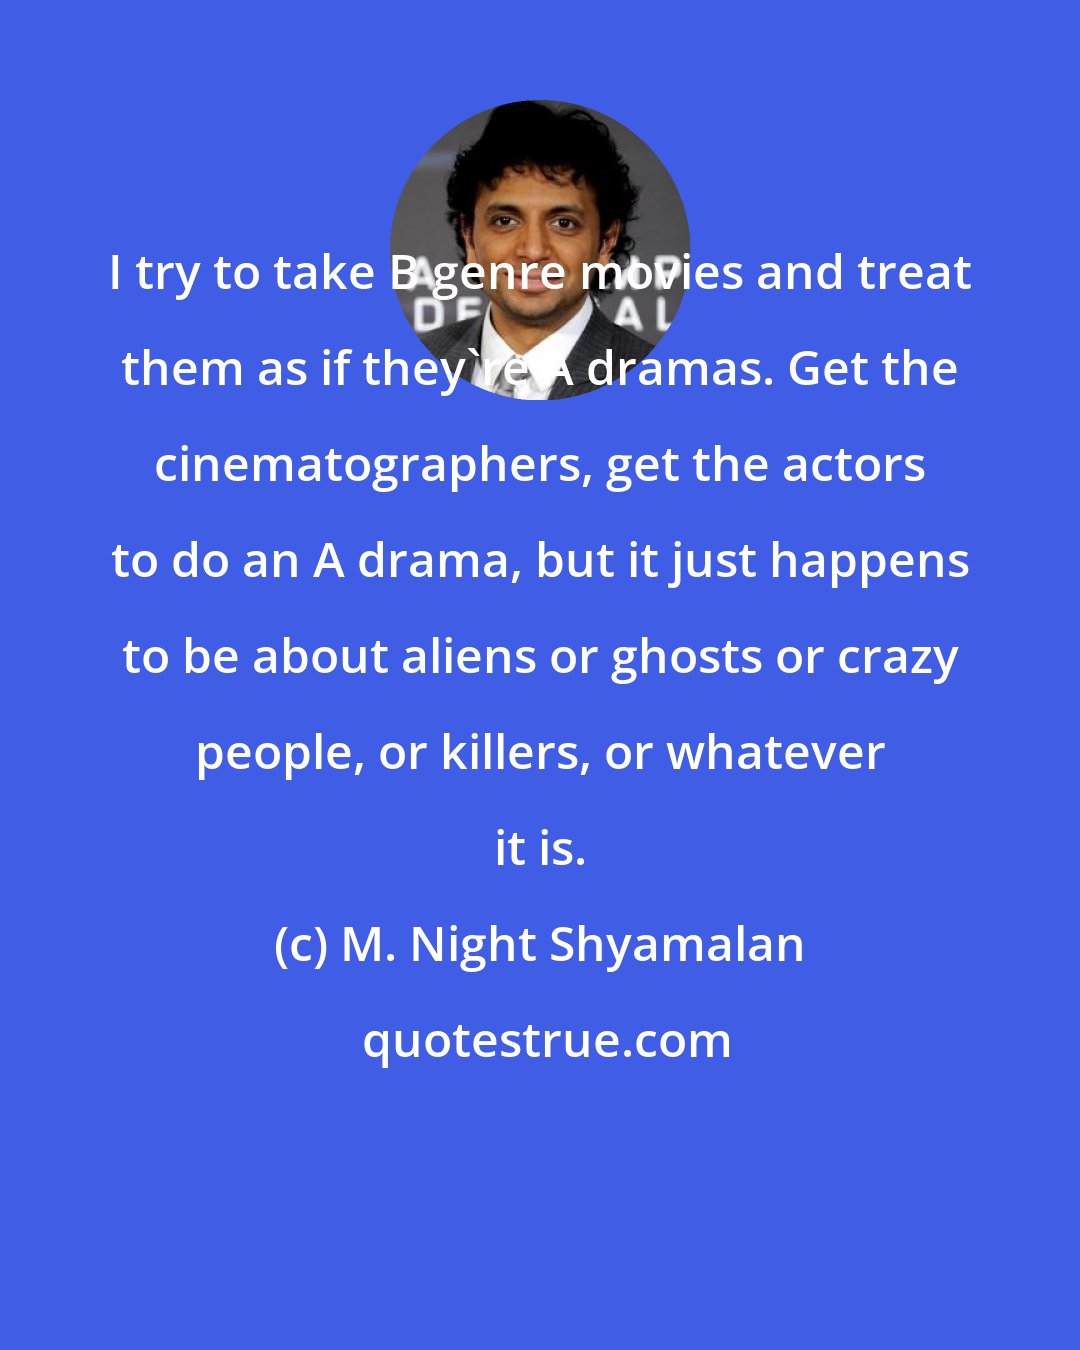 M. Night Shyamalan: I try to take B genre movies and treat them as if they're A dramas. Get the cinematographers, get the actors to do an A drama, but it just happens to be about aliens or ghosts or crazy people, or killers, or whatever it is.